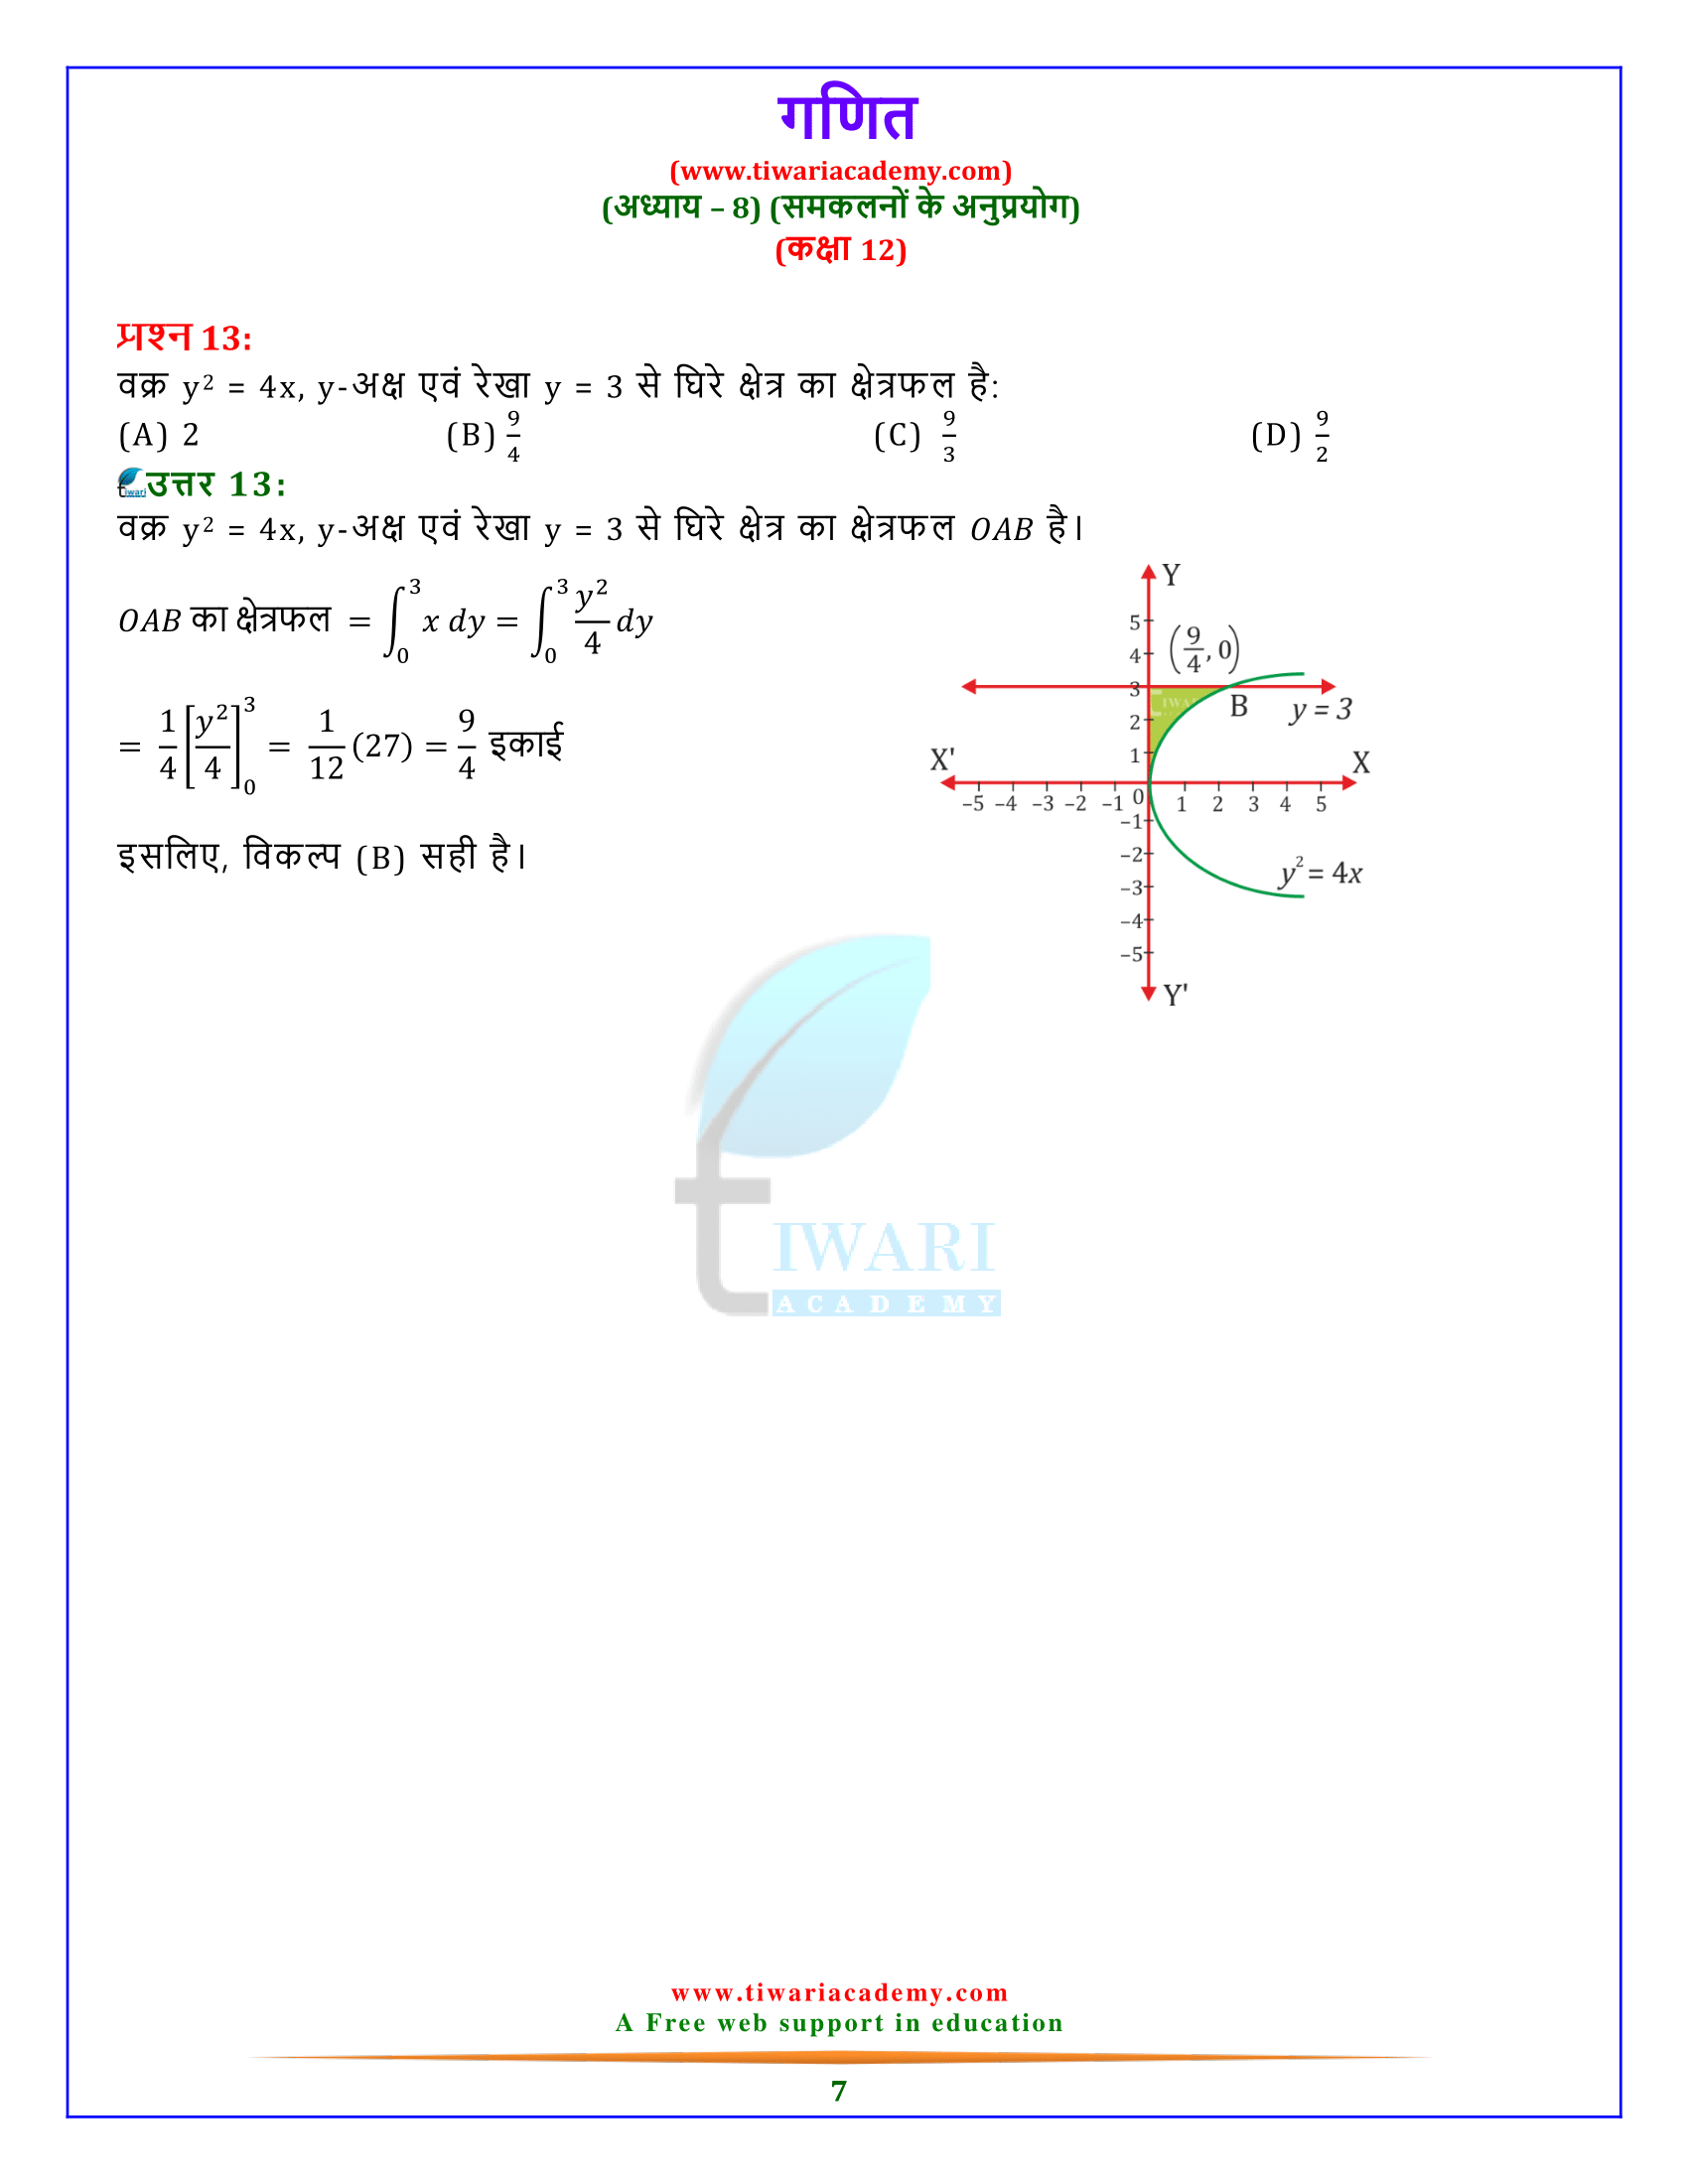 Class 12 Maths solution chapter 8 exercise 8.1 mp board solution